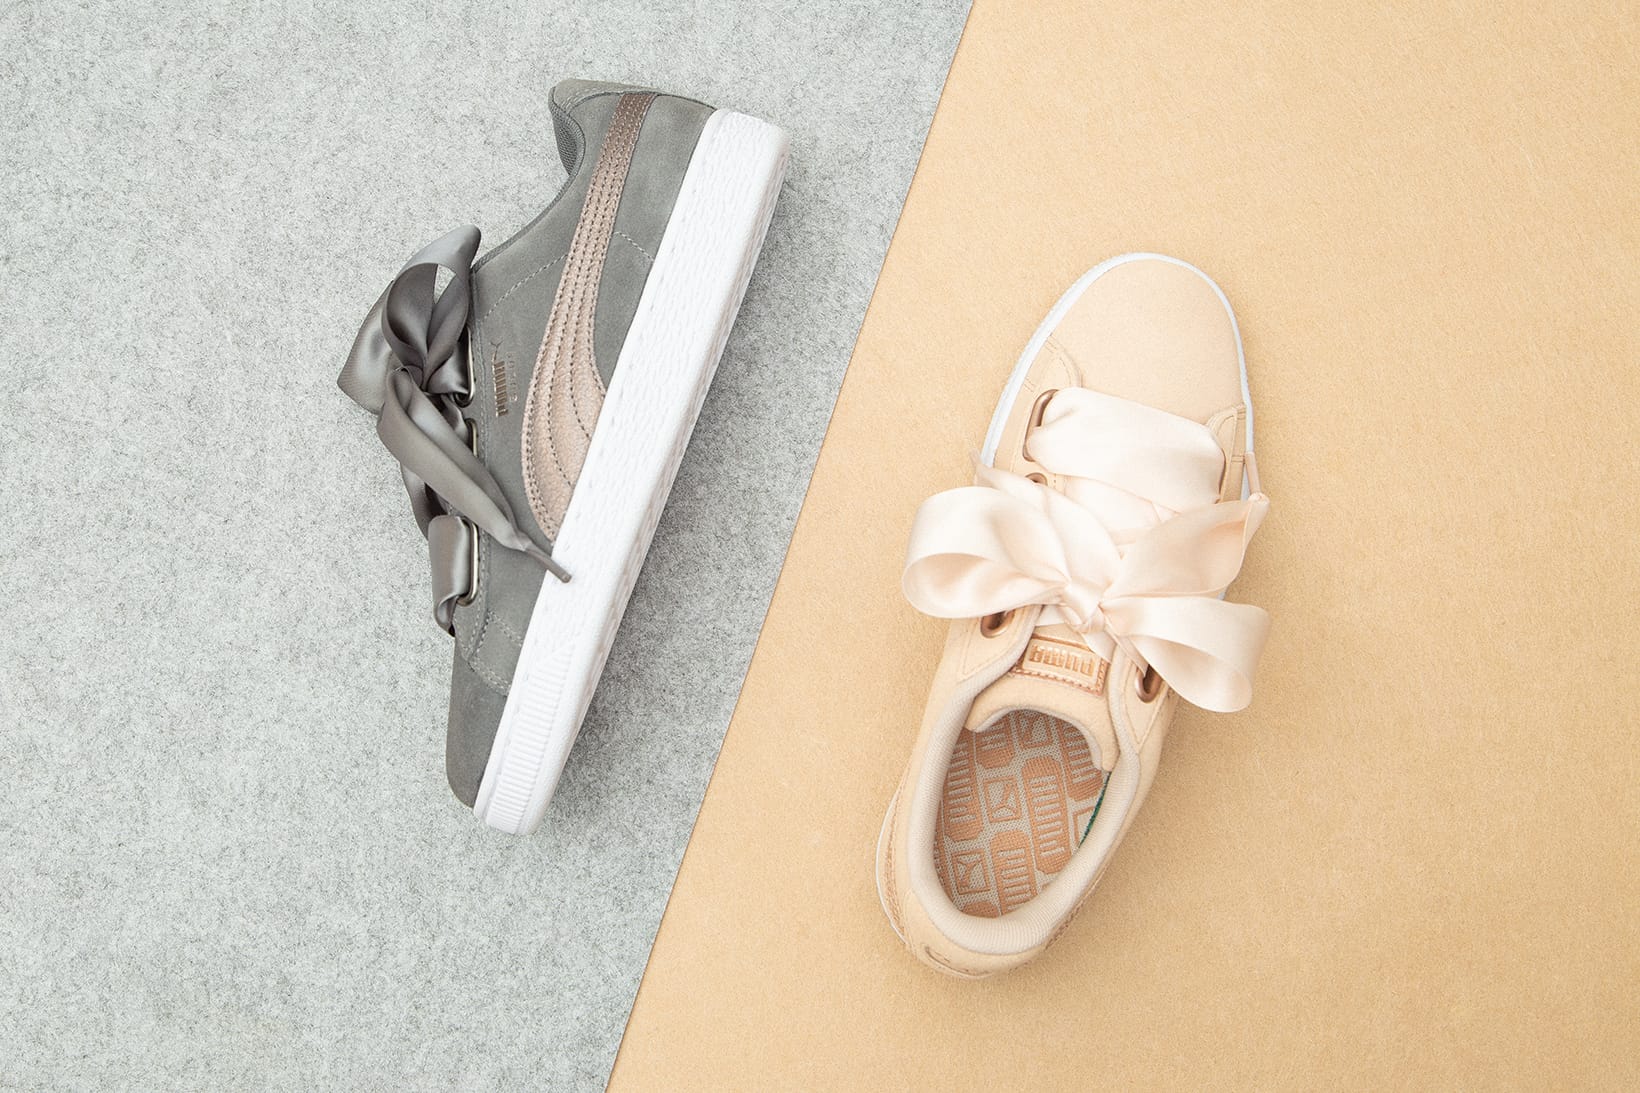 puma suede heart lunalux smoked pearl